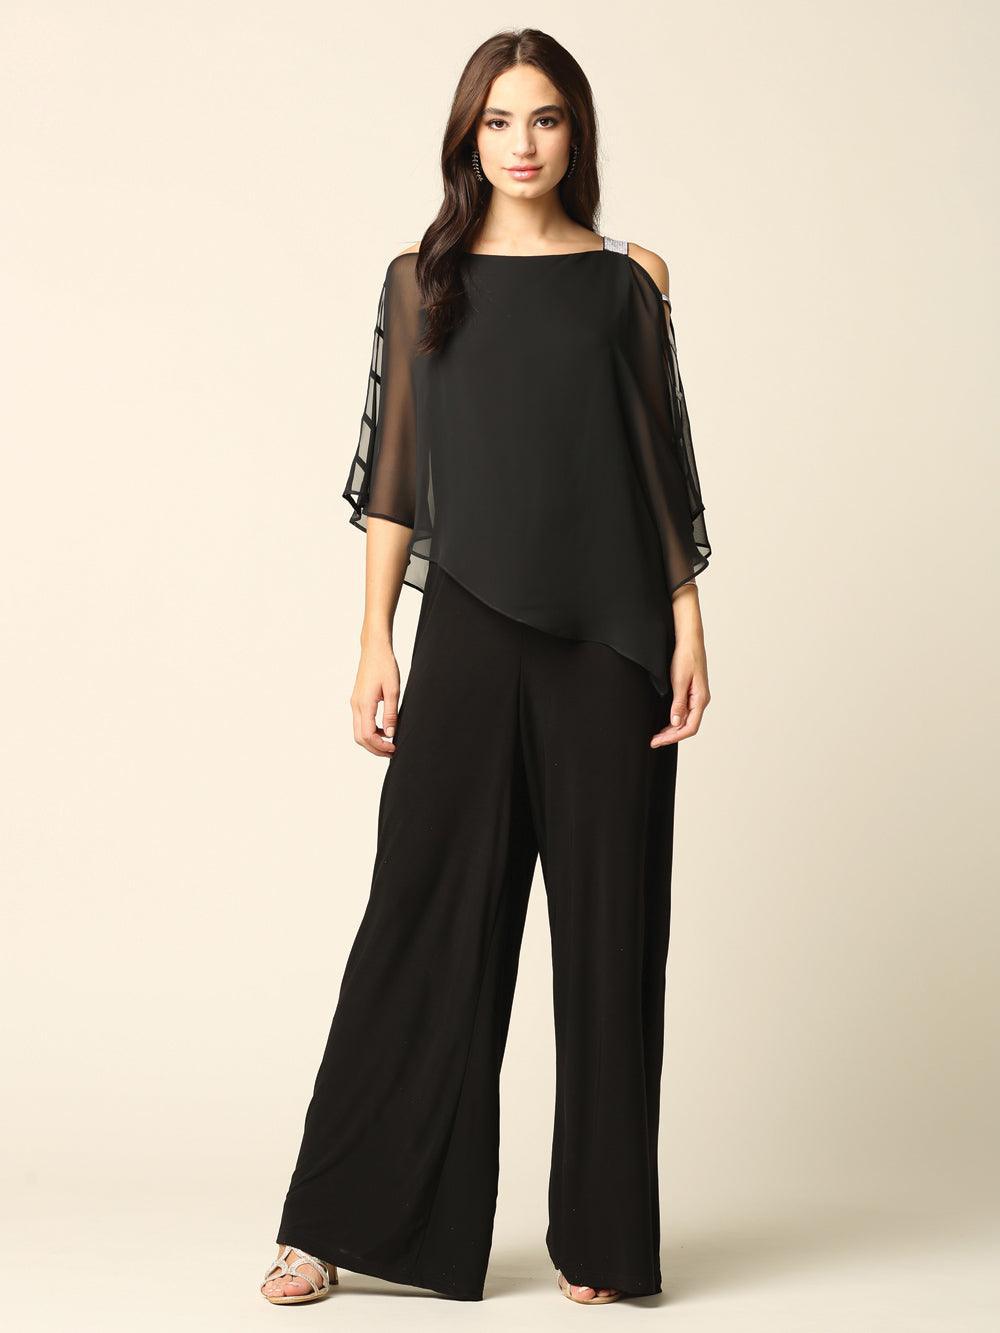 Formal Chiffon Cape Overlay Jumpsuit Sale | The Dress Outlet